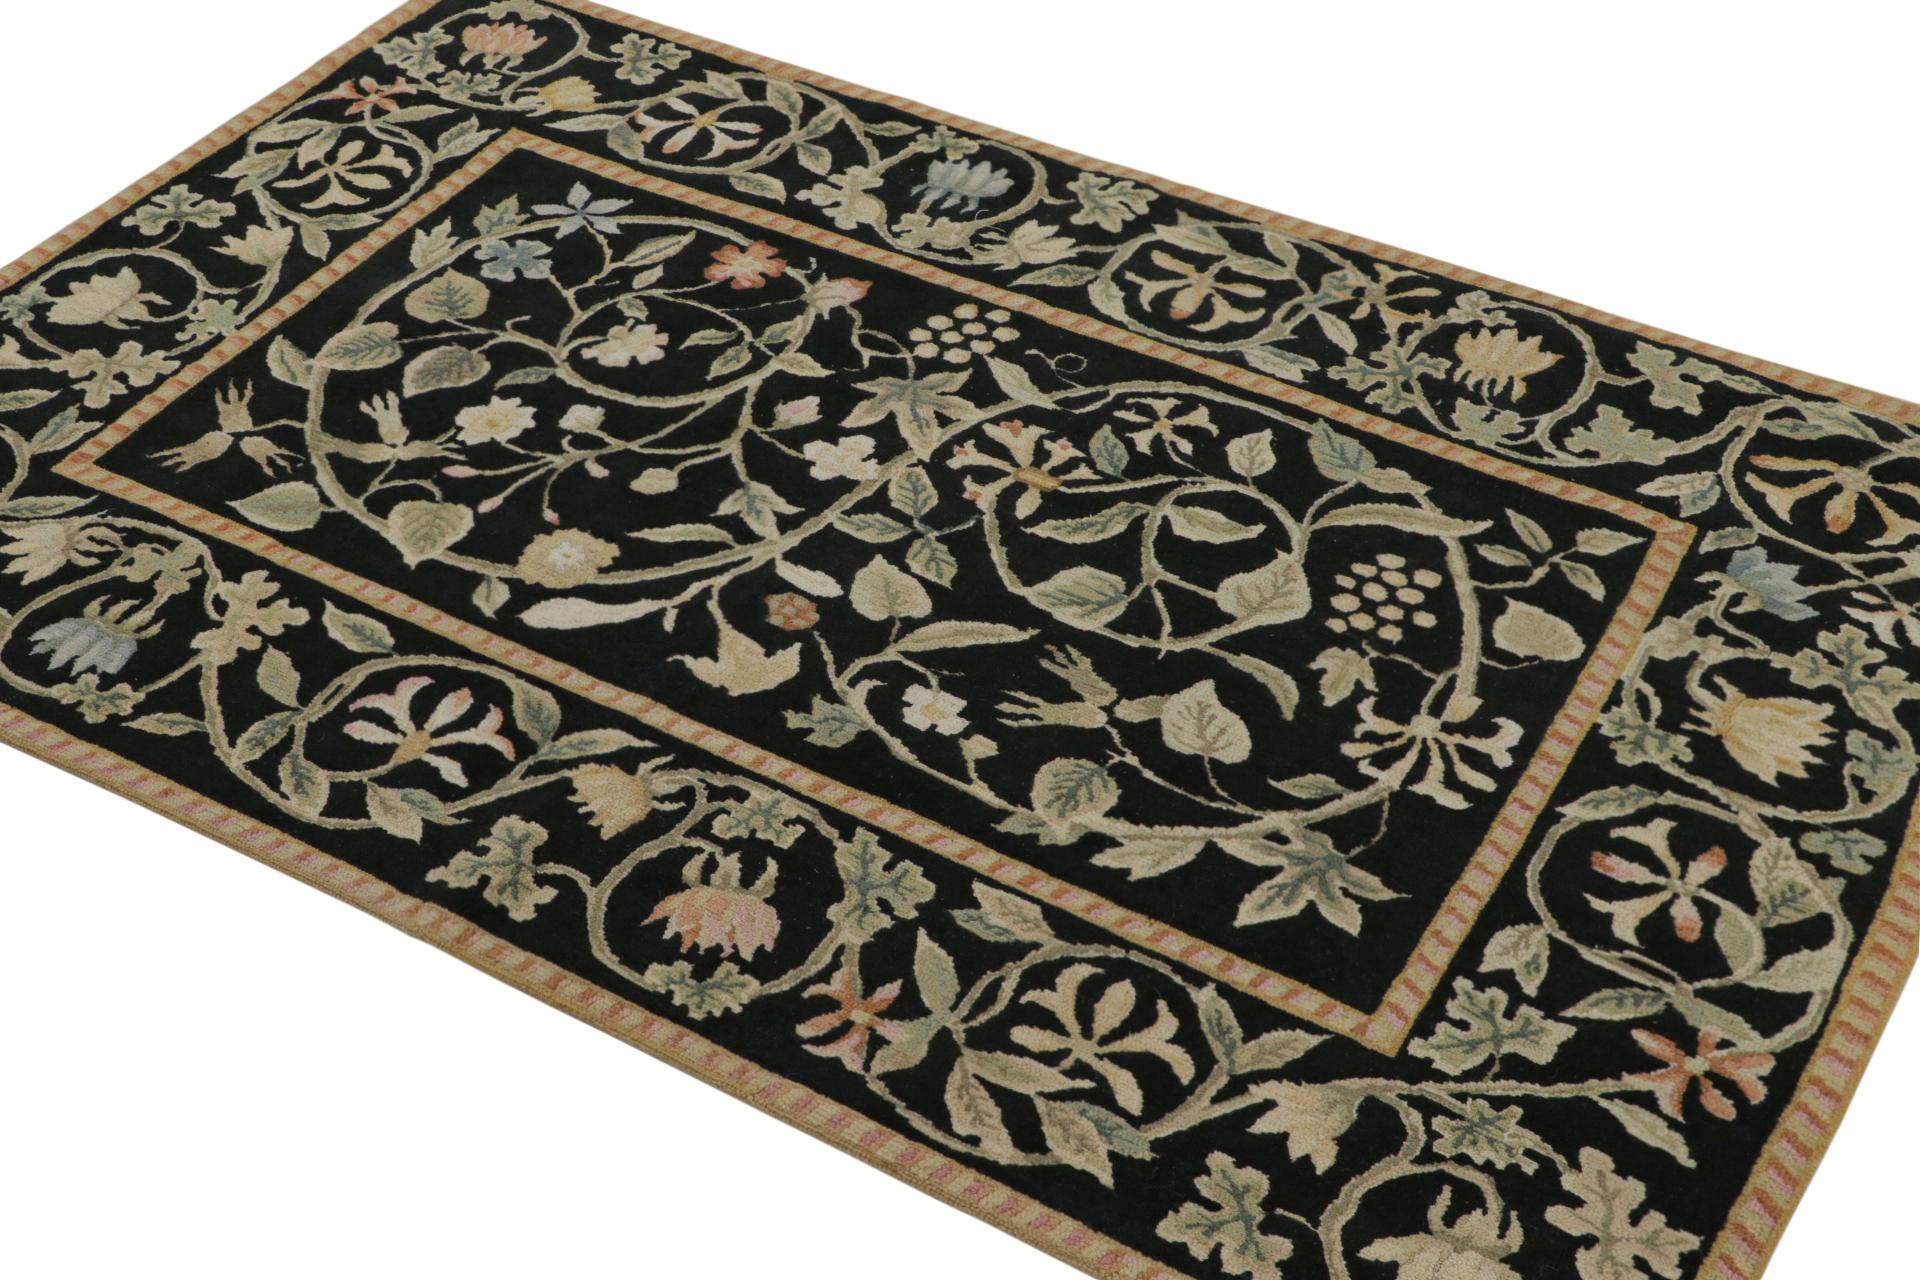 Hand-knotted in wool, this 4x6 European rug in black is the first iteration of this design to be in high-and-low texture. Featuring beige/brown, green and pink floral patterns among many other present brighter tones, this rug has been inspired by